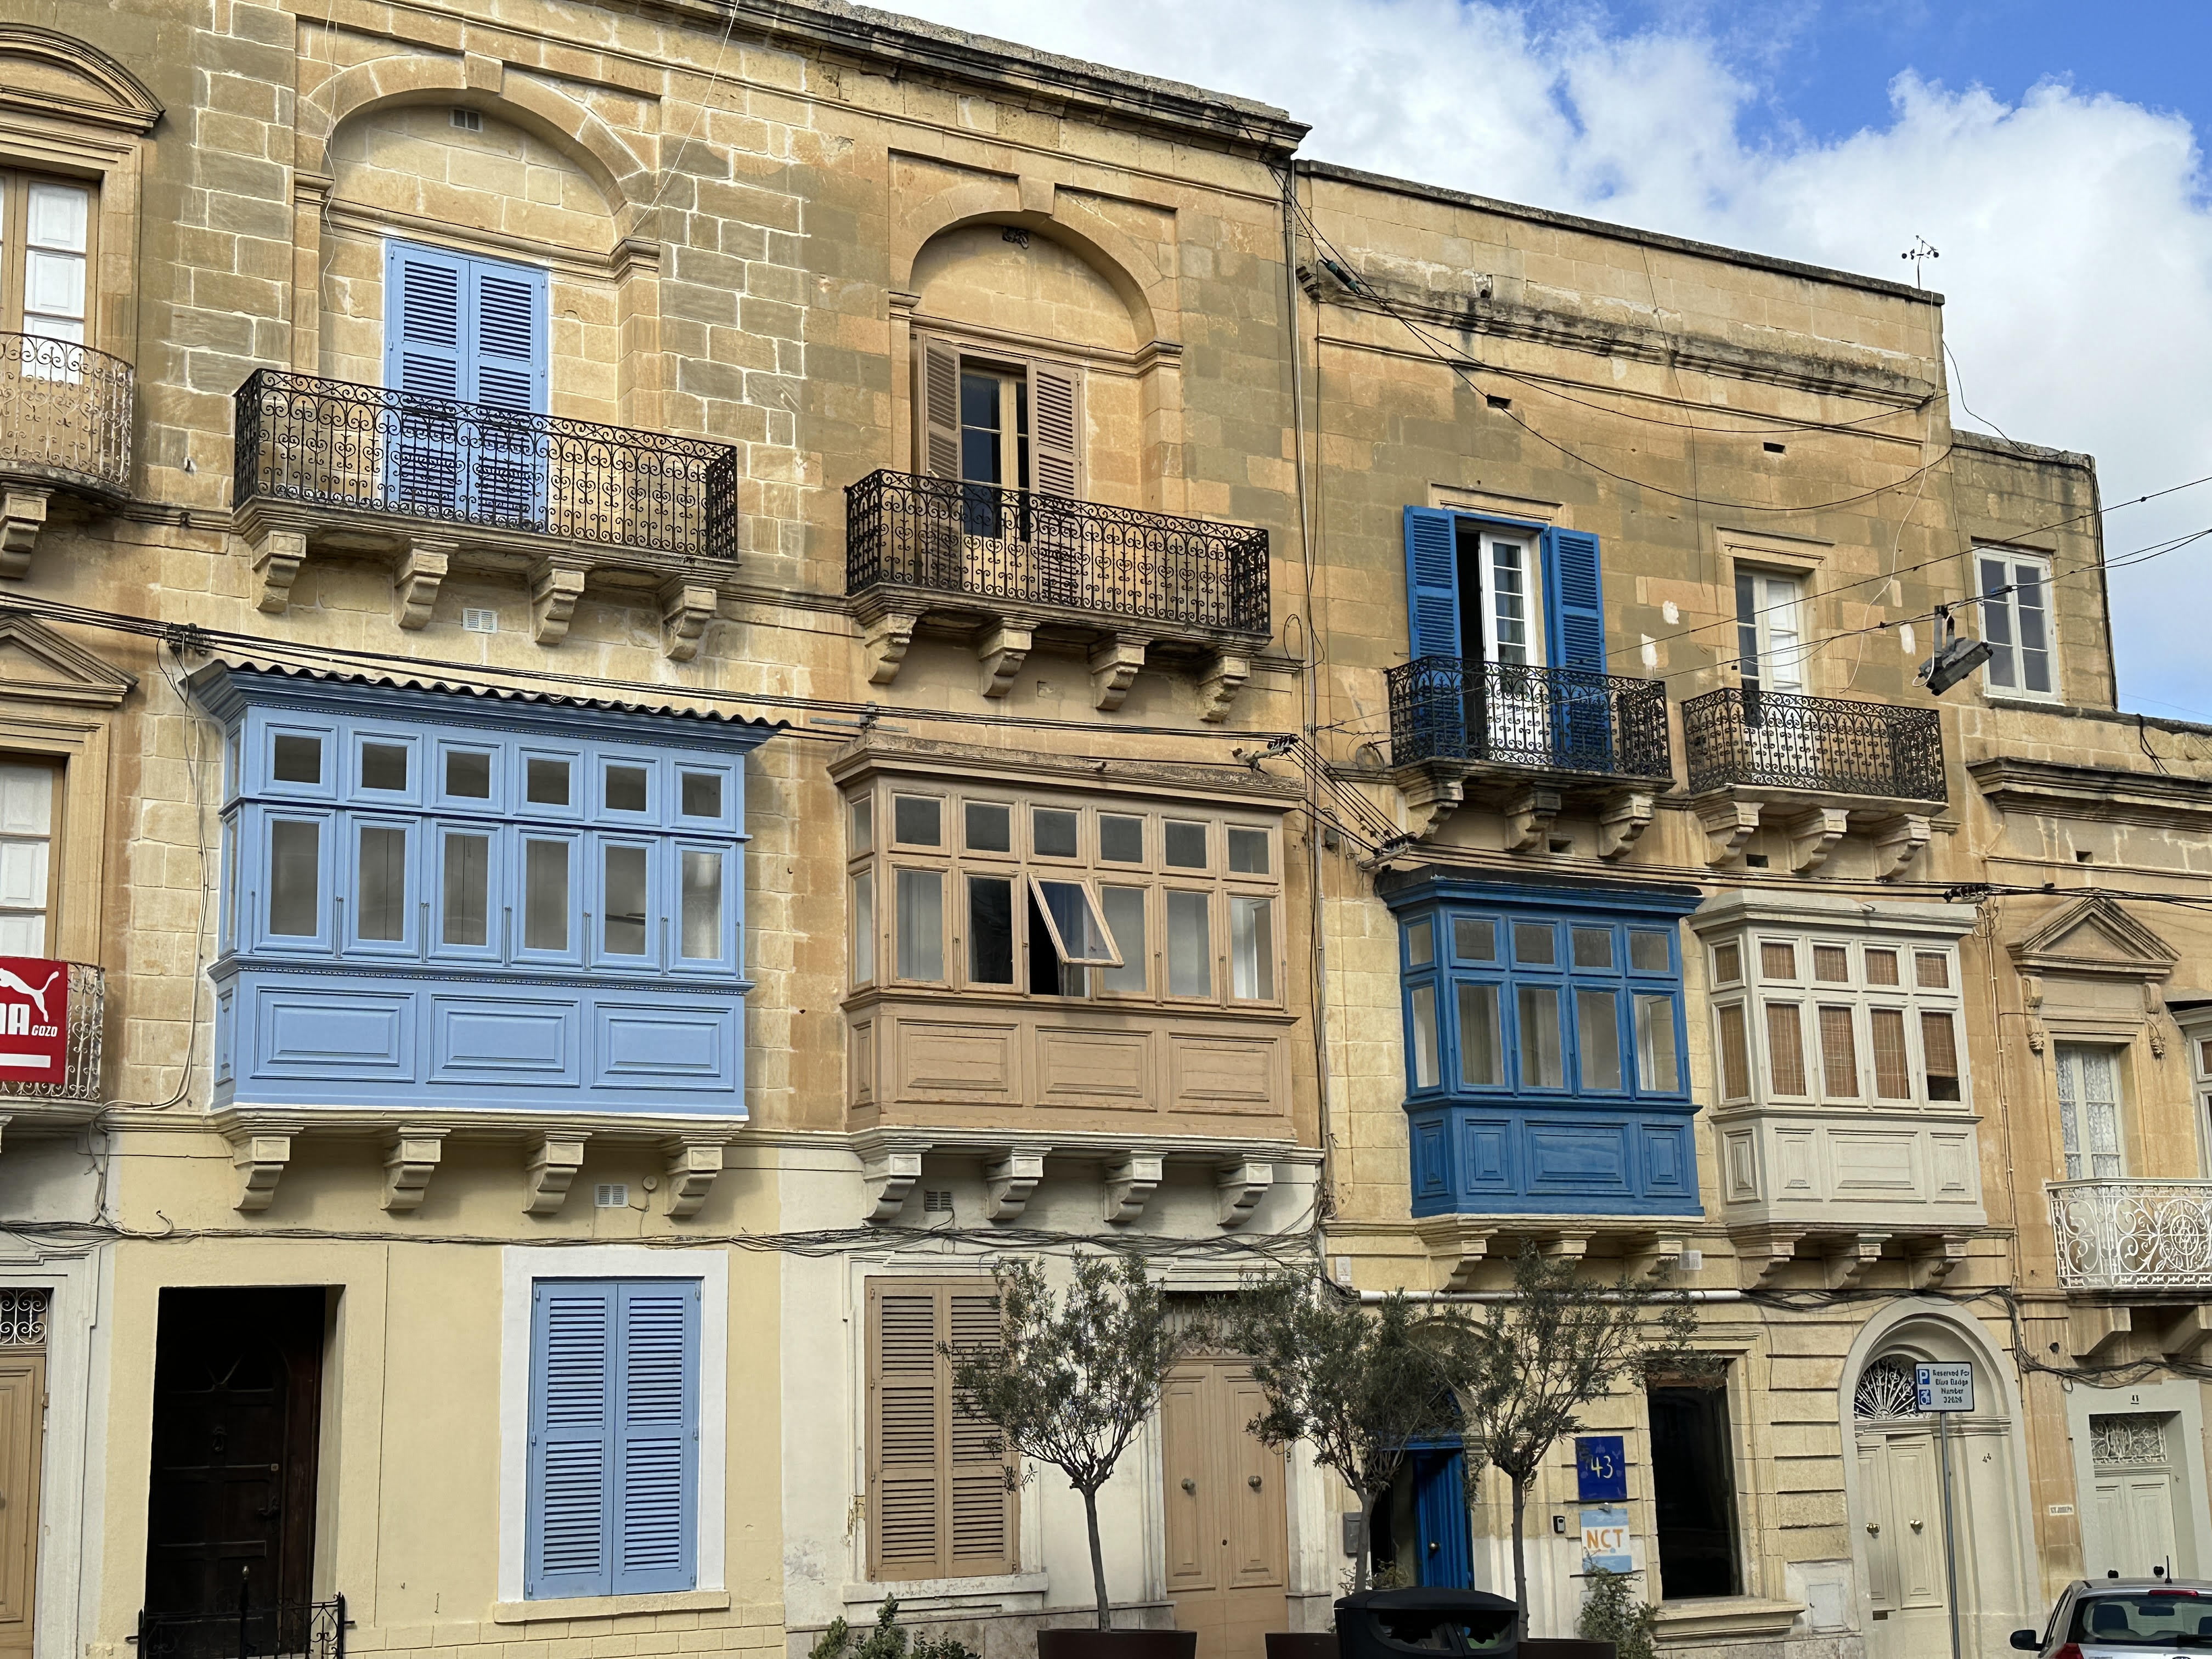 A charming street view in Malta, showcasing traditional Maltese balconies painted in pastel shades of blue, beige, and white. The stone buildings feature ornate wrought-iron railings and shutters, adding to the picturesque and historic ambiance. The bright sky and a few trees in the foreground complete this quaint urban scene.